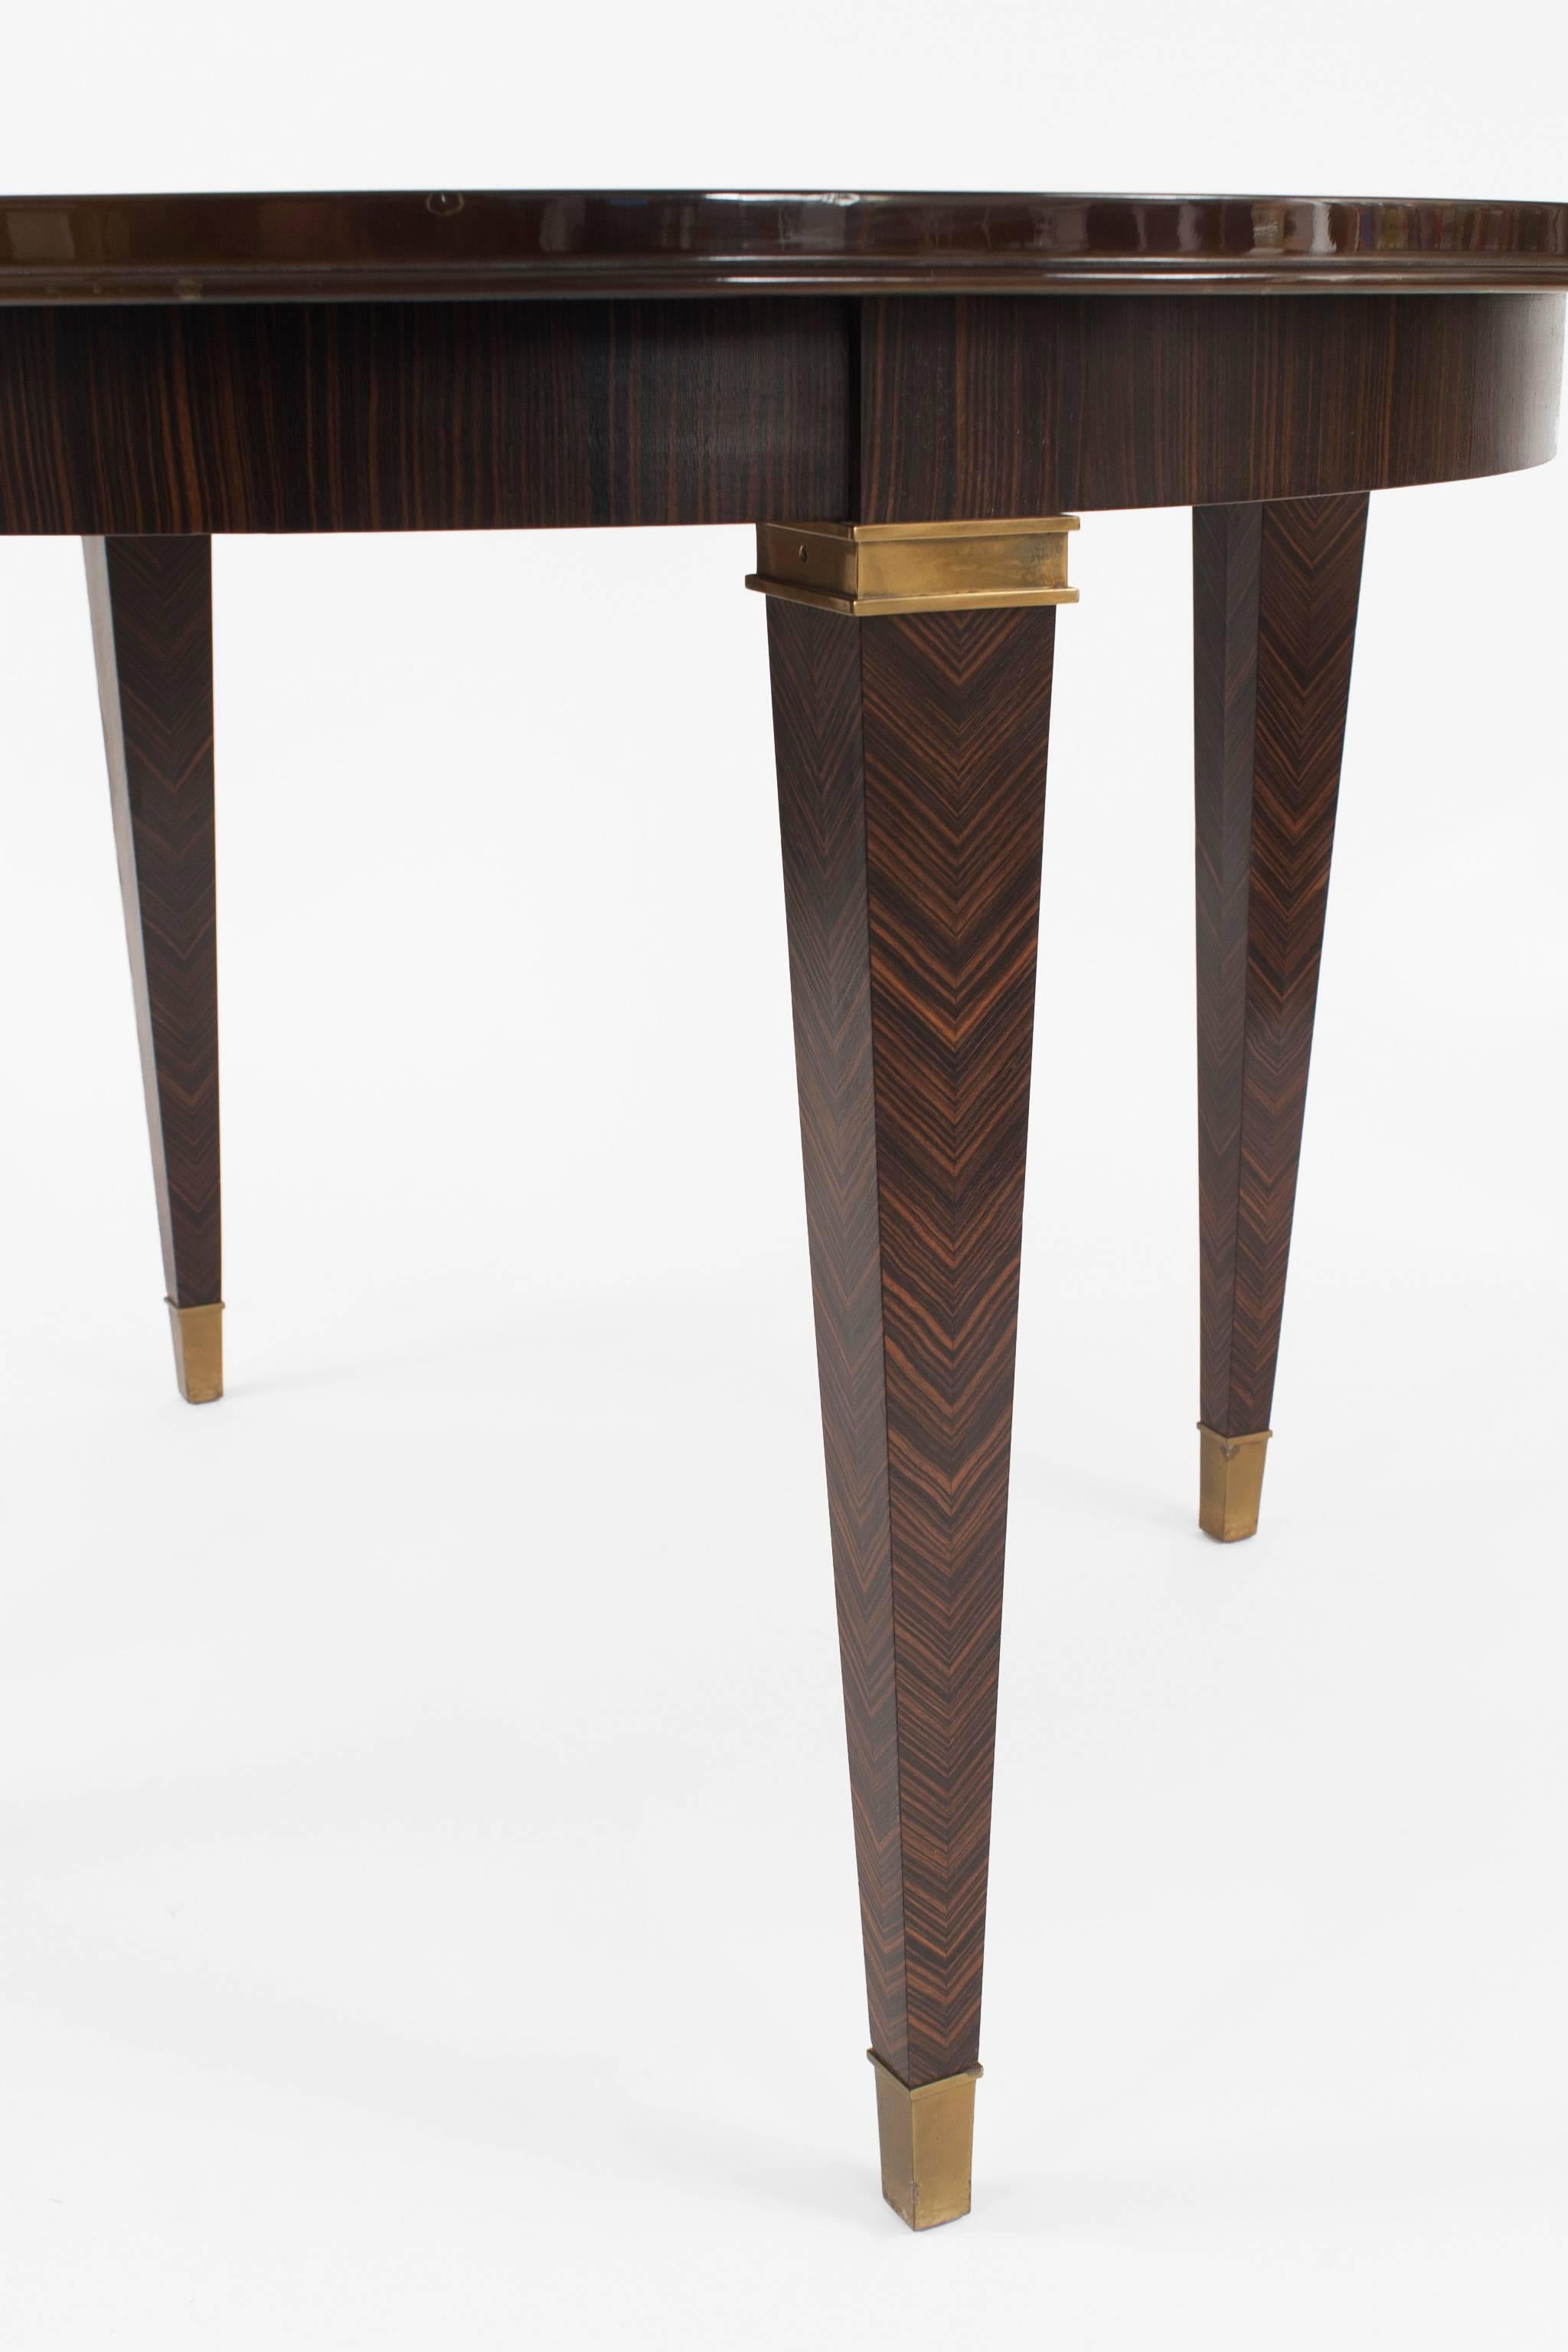 French Art Deco (1930s) round dining table with a brown lacquered top (by Atelier Sain et Tambuté, Paris) over four tapered Macassar wood legs with bronze trim by Dominique. *No leaves.


The decorating firm of Dominique was established in l922 at